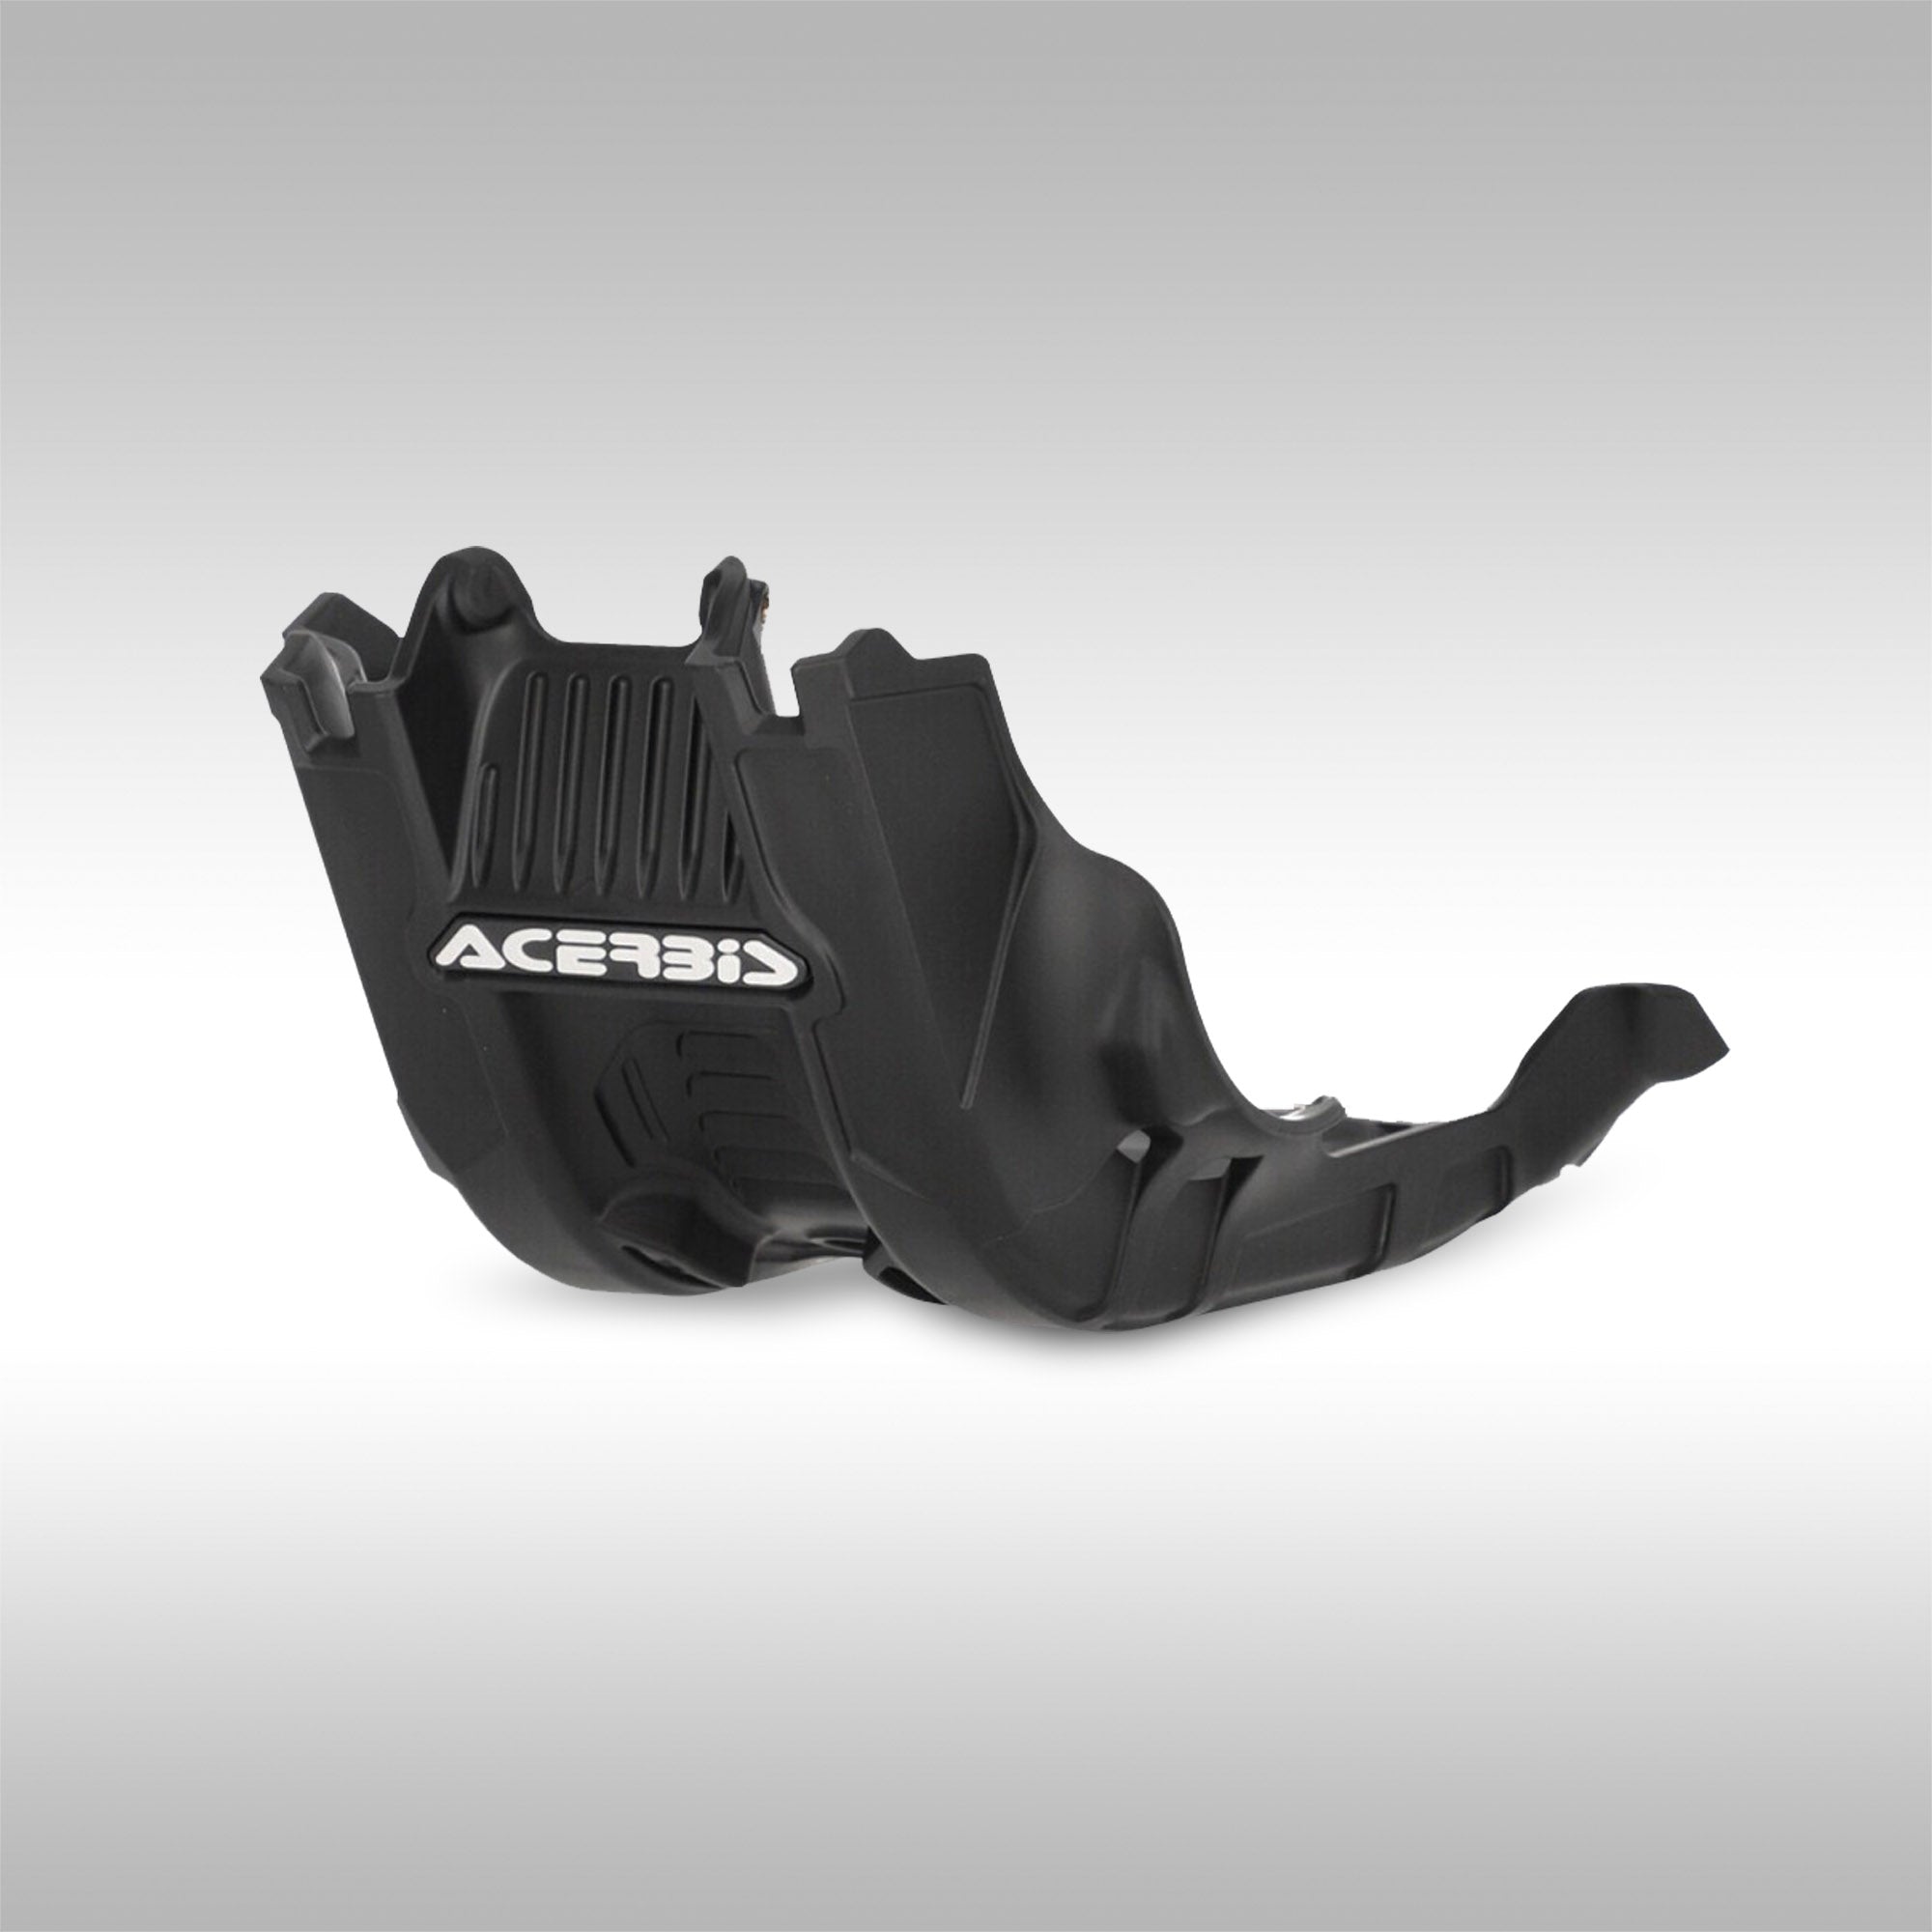 Acerbis skid plate for the 2023 - 2024 KTM XC and XC-F motorcycles. Dirtbike parts and accessories. KTM XC skid plate. KTM XC-F Skid Plate.